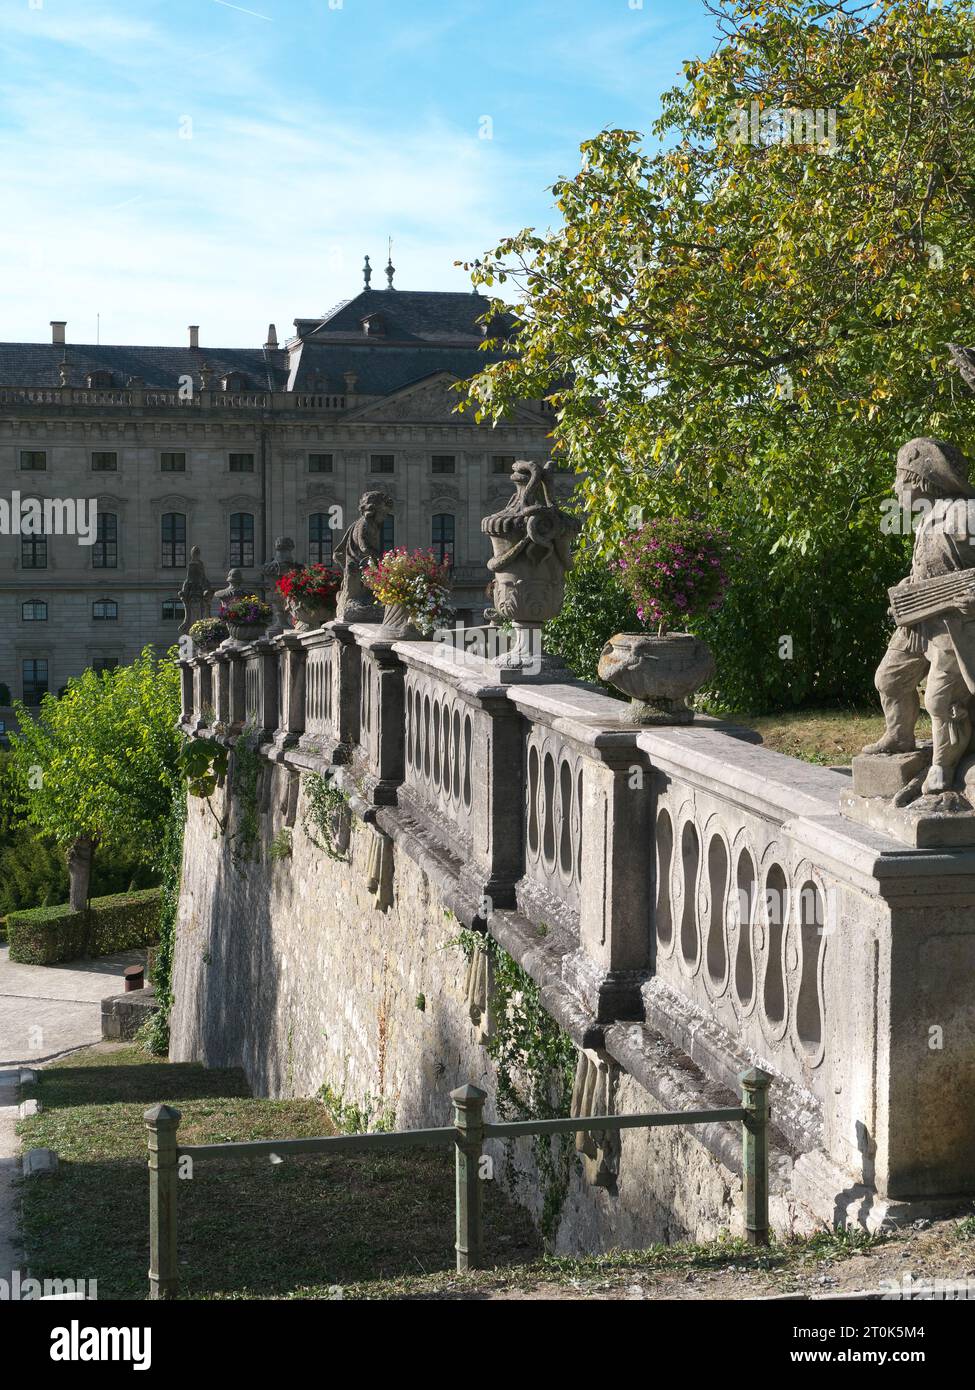 Baroque balustrade with sandstone statues in the court garden in front of the facade of the Würzburg Residence Stock Photo